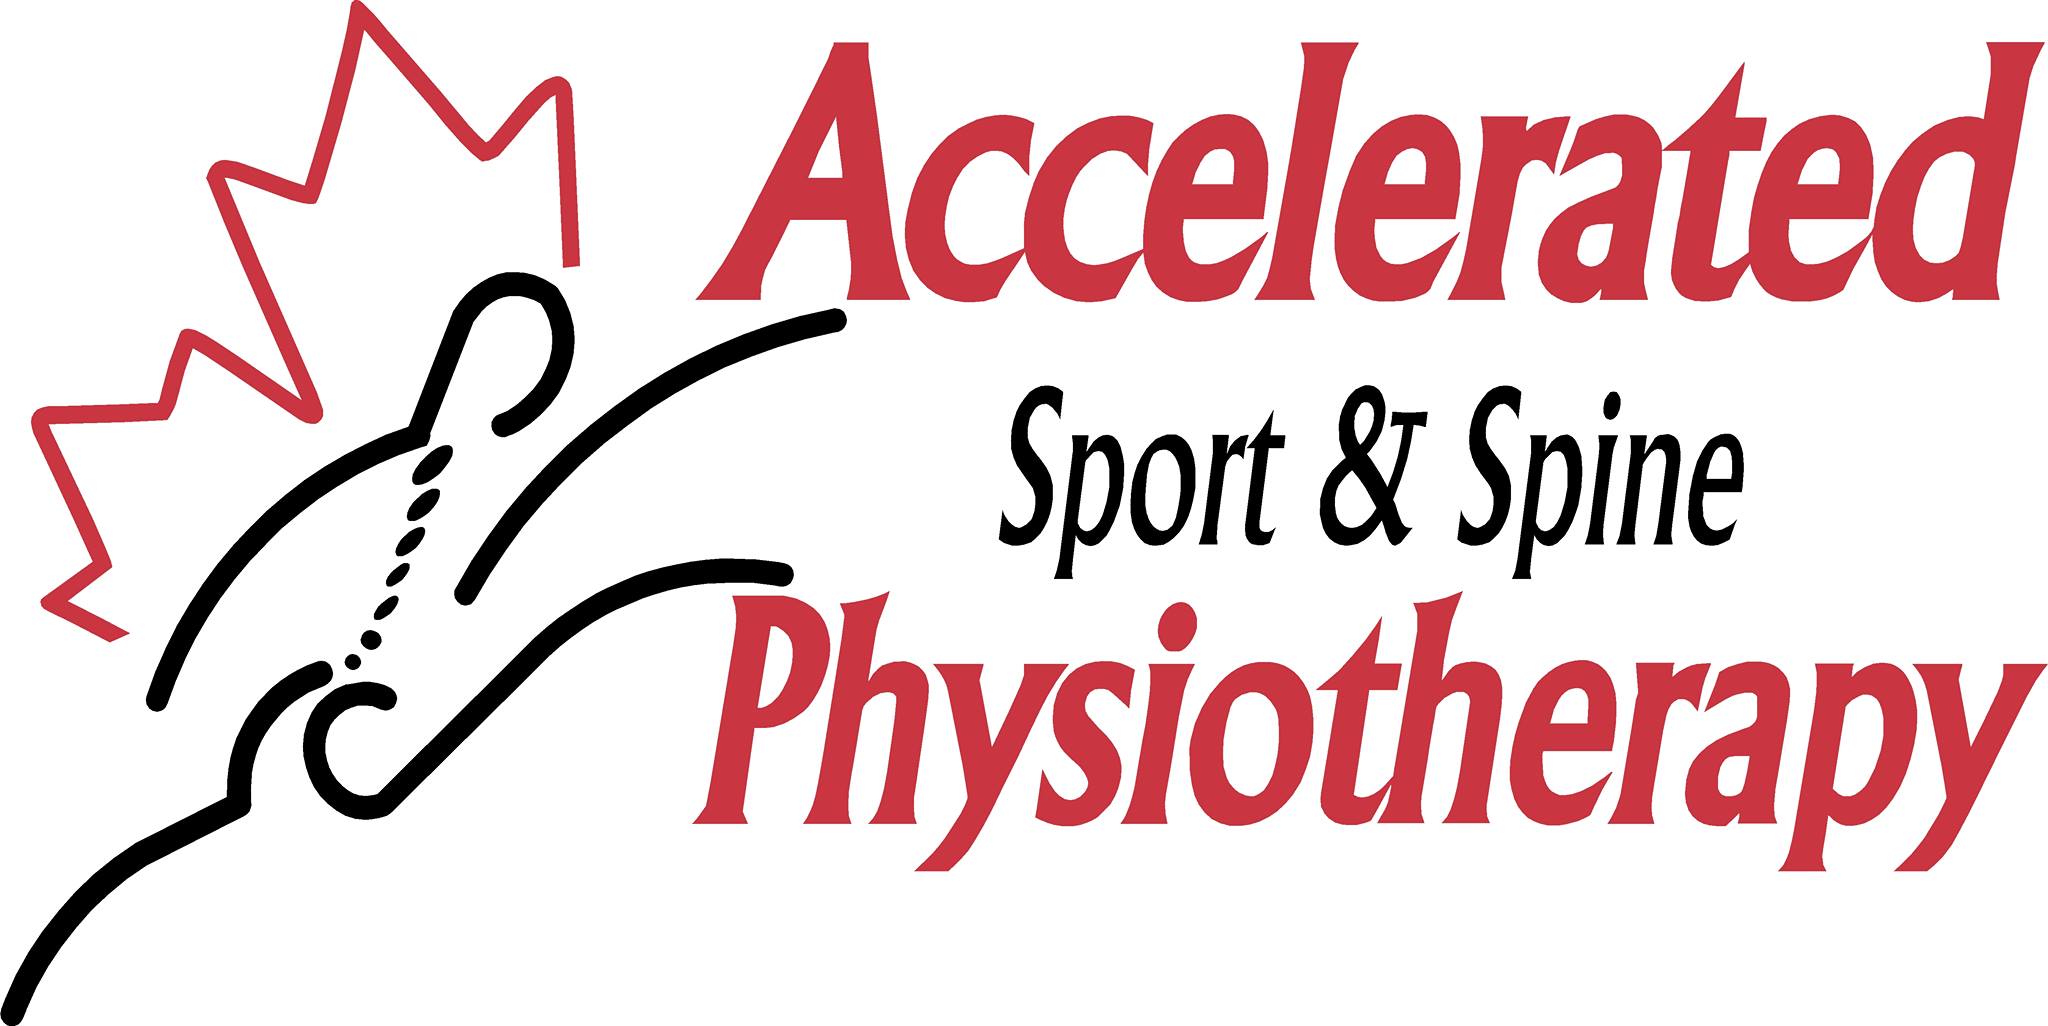 Accelerated Sport & Spine Physiotherapy 